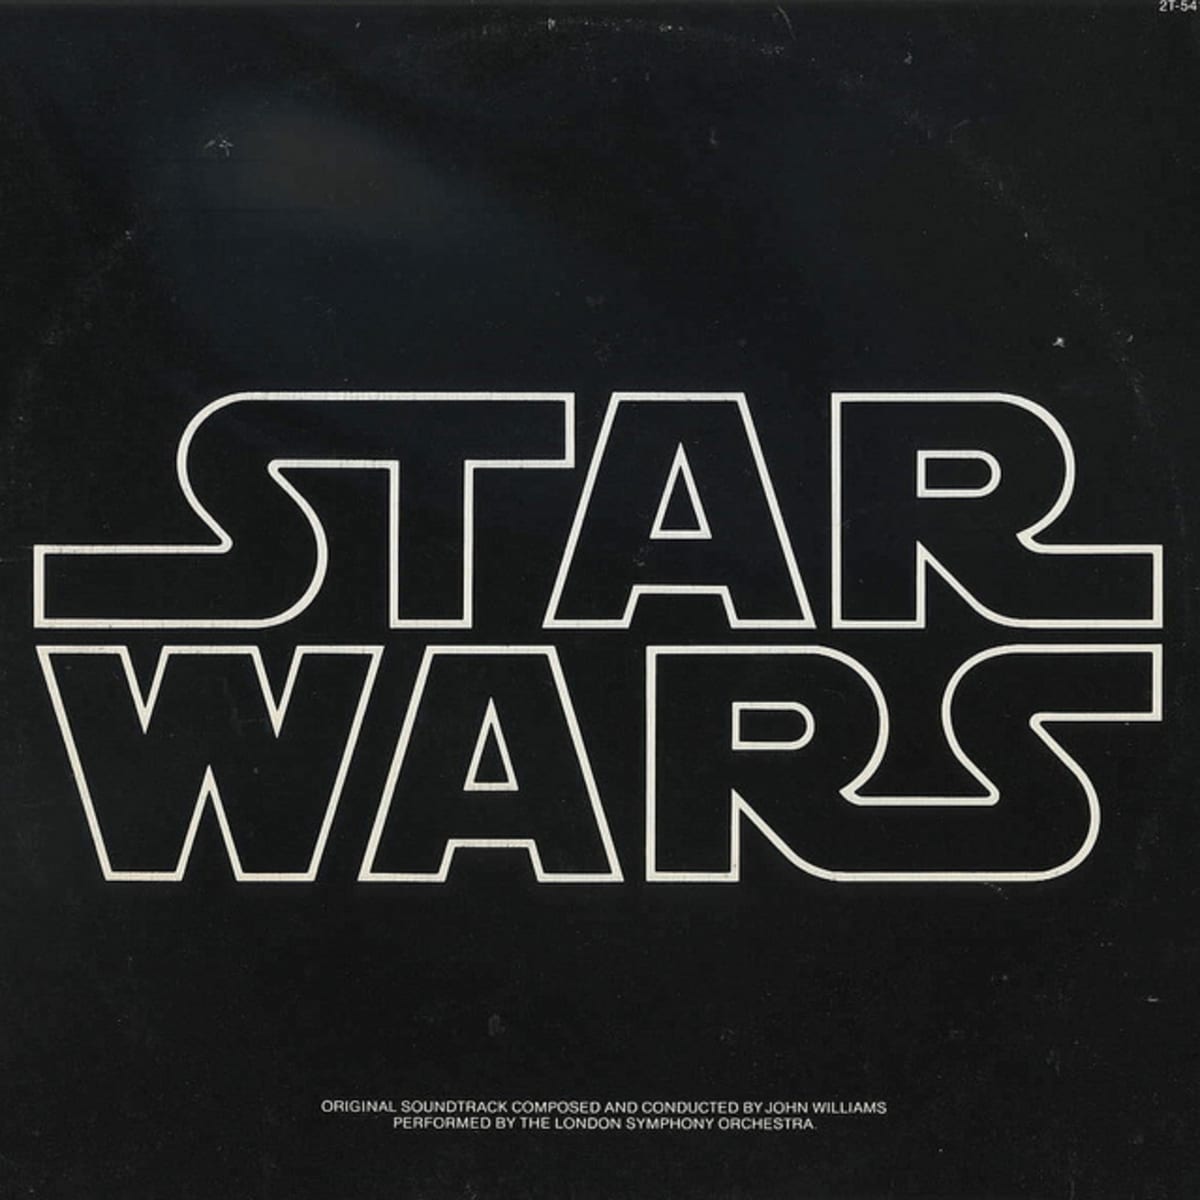 Star Wars Soundtrack LP Vinyl Record with A Space Odyssey John Williams 1977